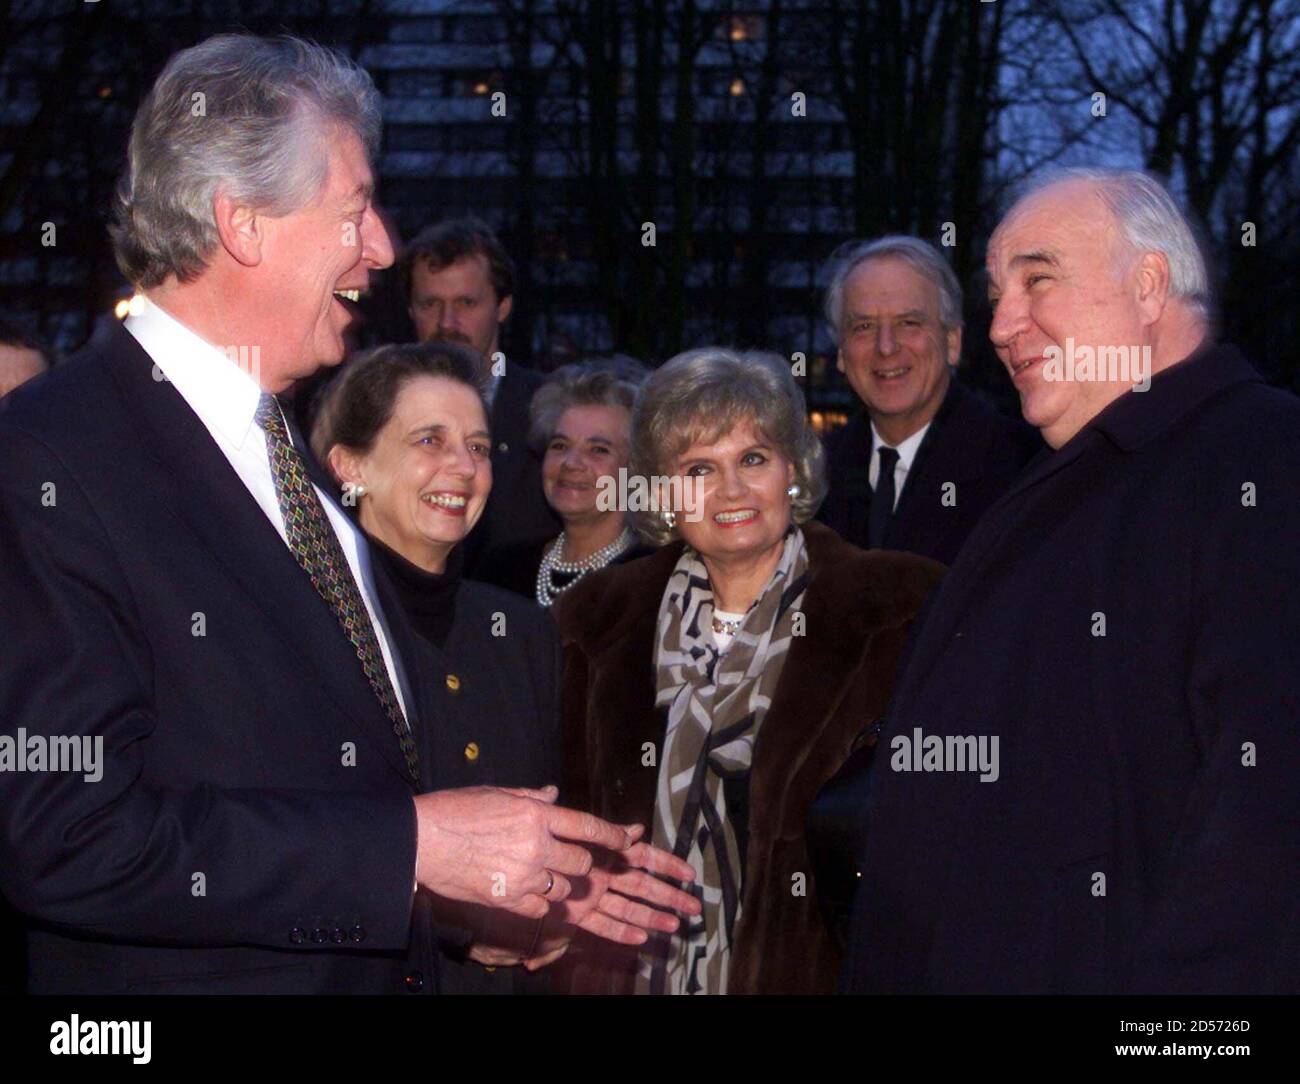 Former German Chancellor Helmuth Kohl (R) and his wive Hannelore Kohl meet Dutch Prime Minister Wim Kok (L) and his wive Rita Kok at the Catshuis in The Hague January 13. During his farewell visit to The Netherlands Kohl was presented with the Highest Dutch award, Het Grootkruis in de Orde van de Nederlands Leeuw.  FEE/GB Stock Photo